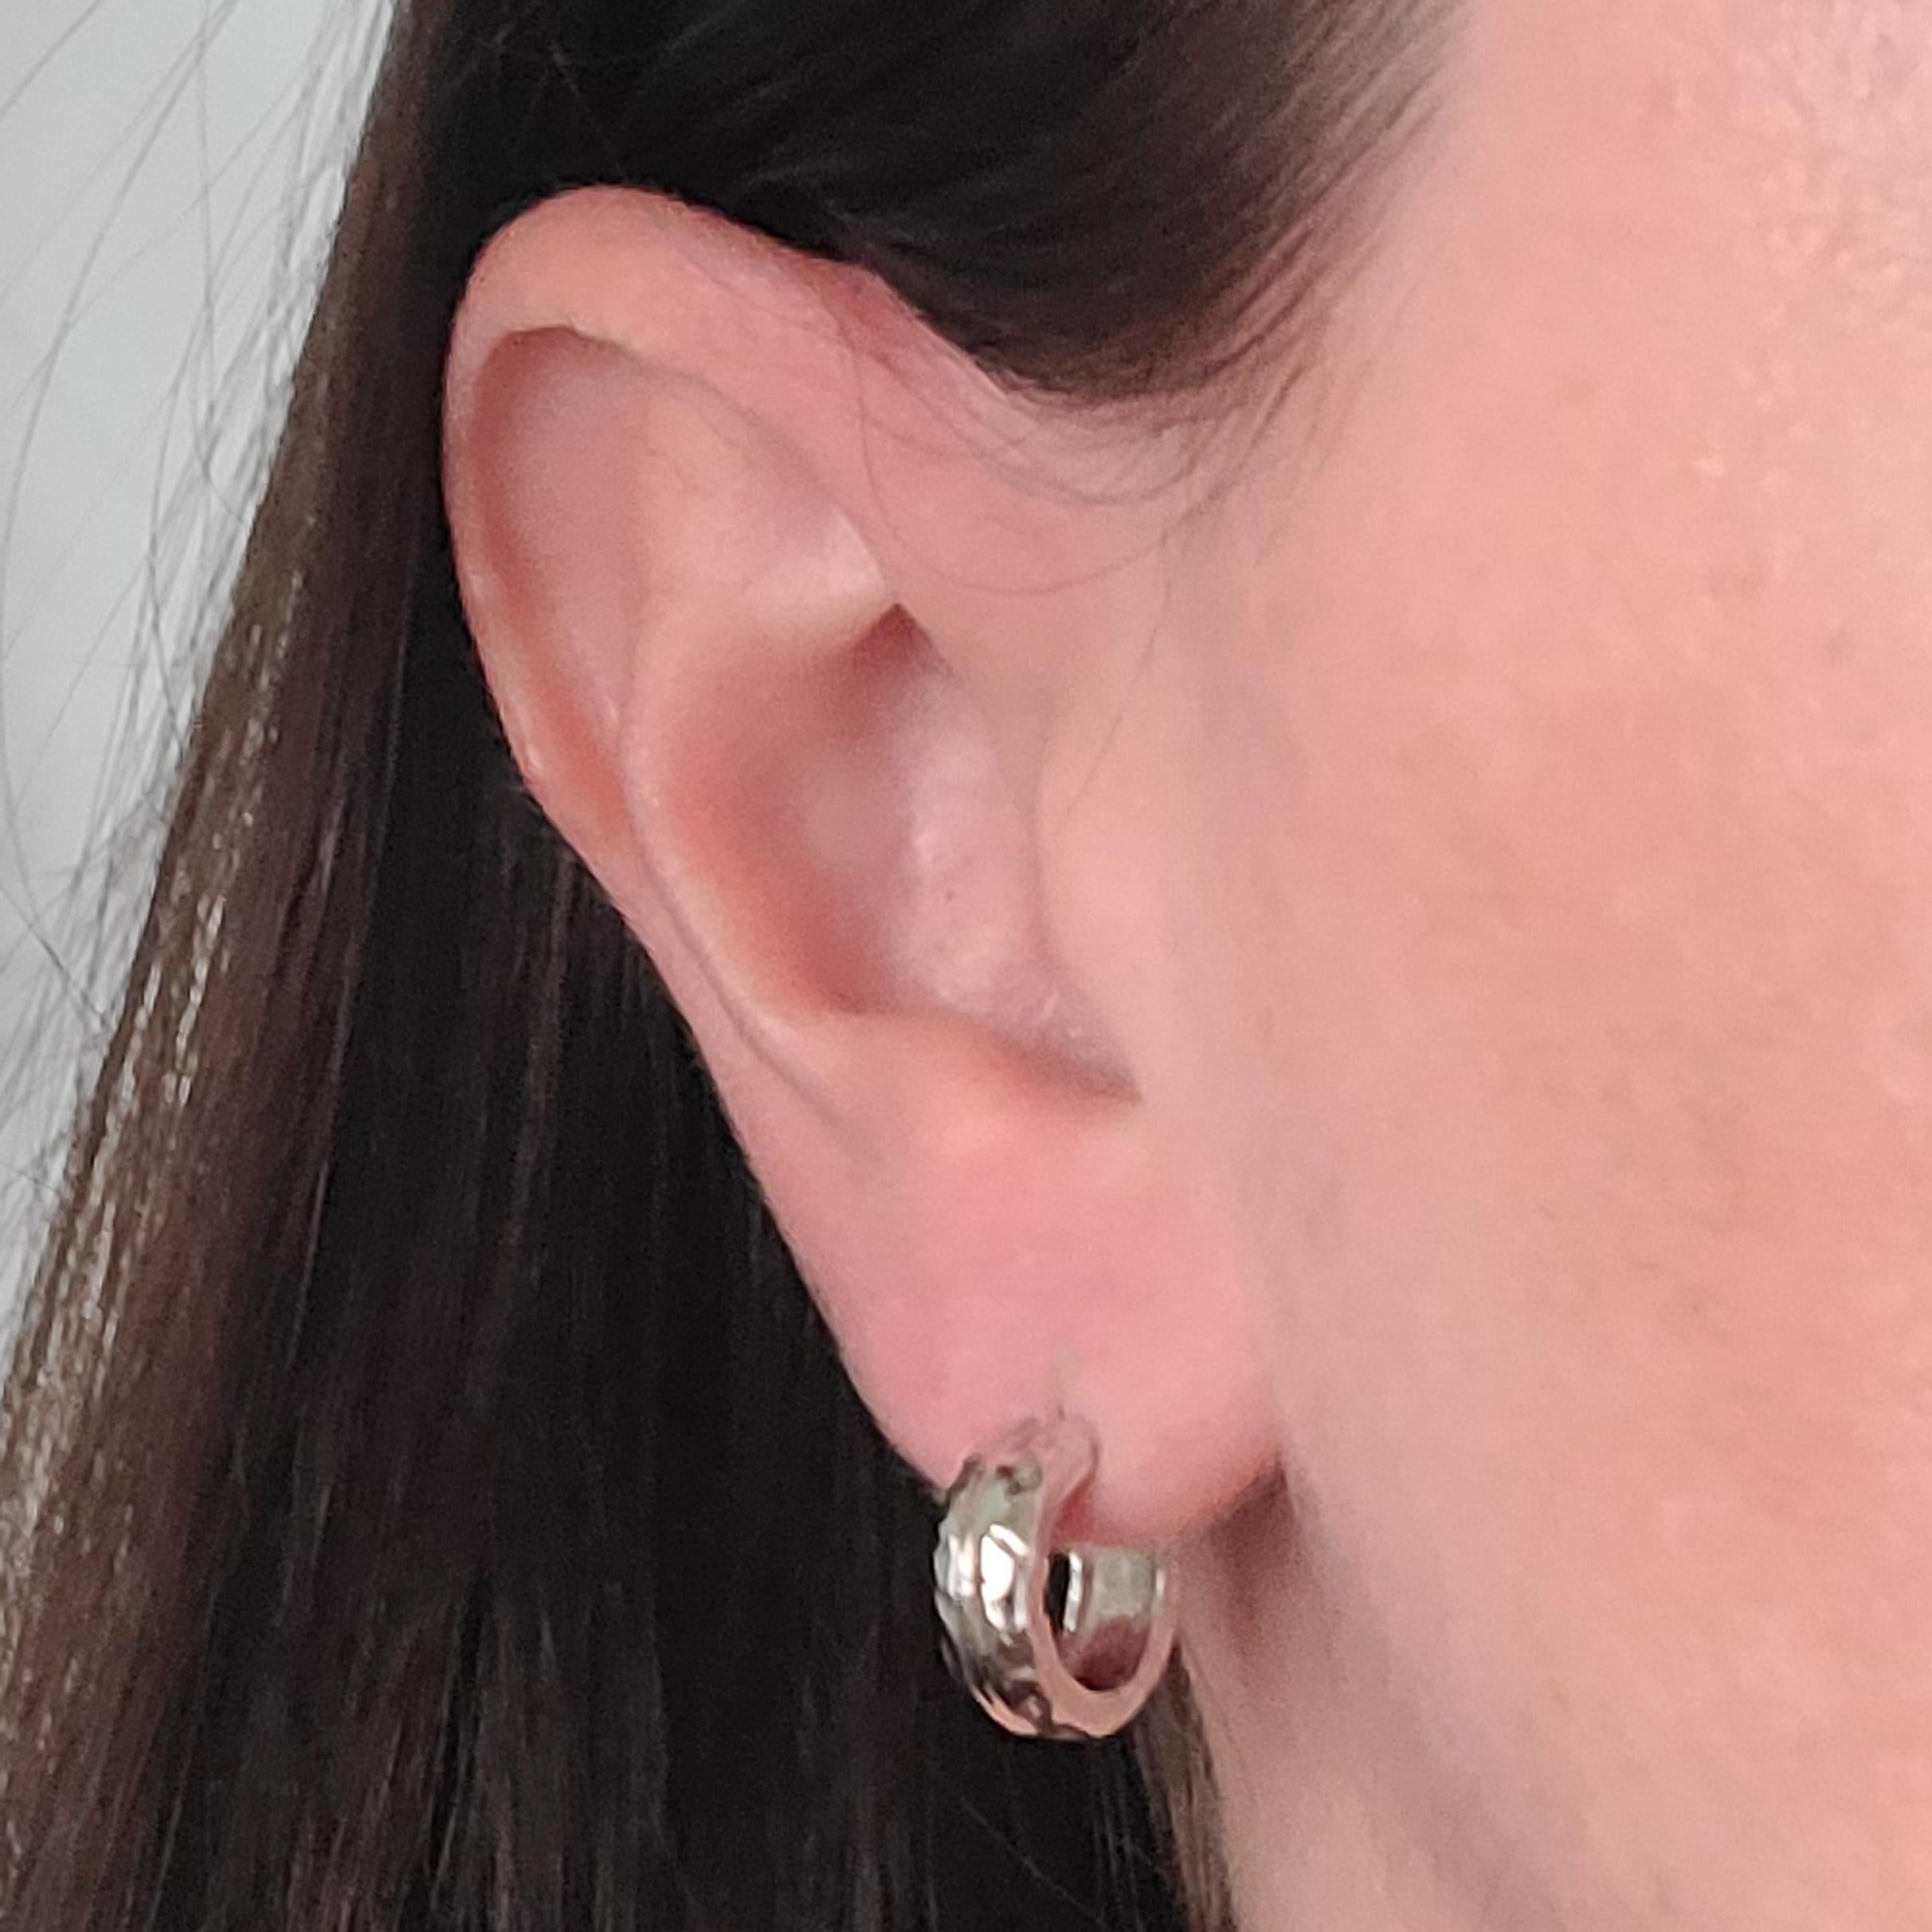 18 Karat White Gold 5mm Wide Huggie Hoop Earrings Measuring 13.5mm In Diameter. Hammered Edge with High Polish Center. Pierced Post With Friction Back. Finished Weight Is 5.3 Grams.